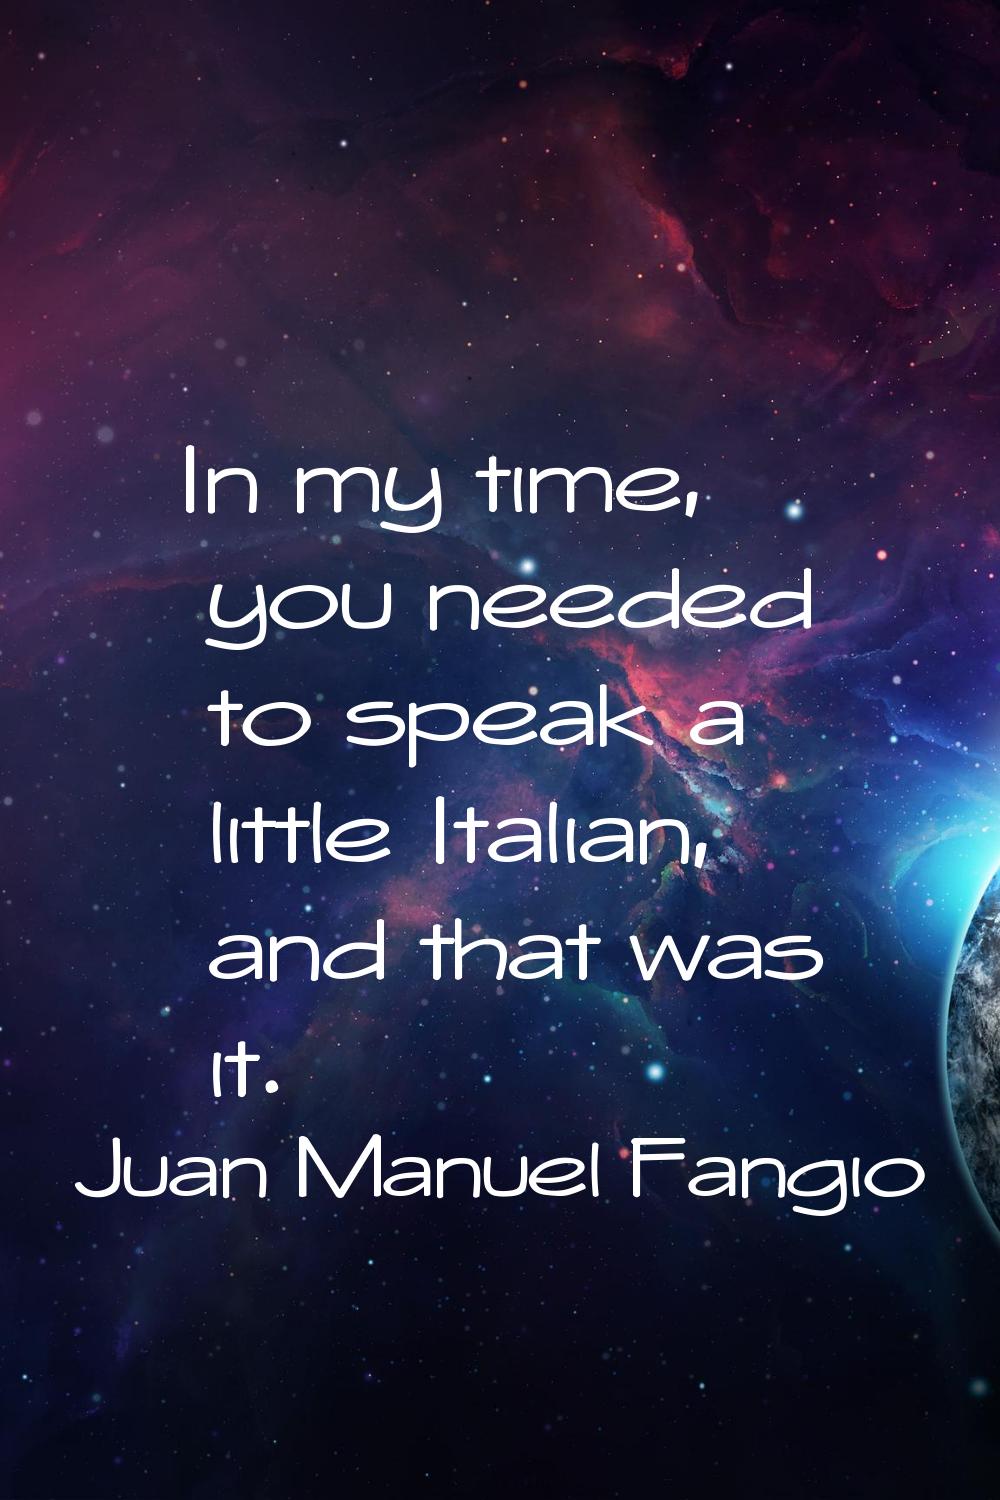 In my time, you needed to speak a little Italian, and that was it.